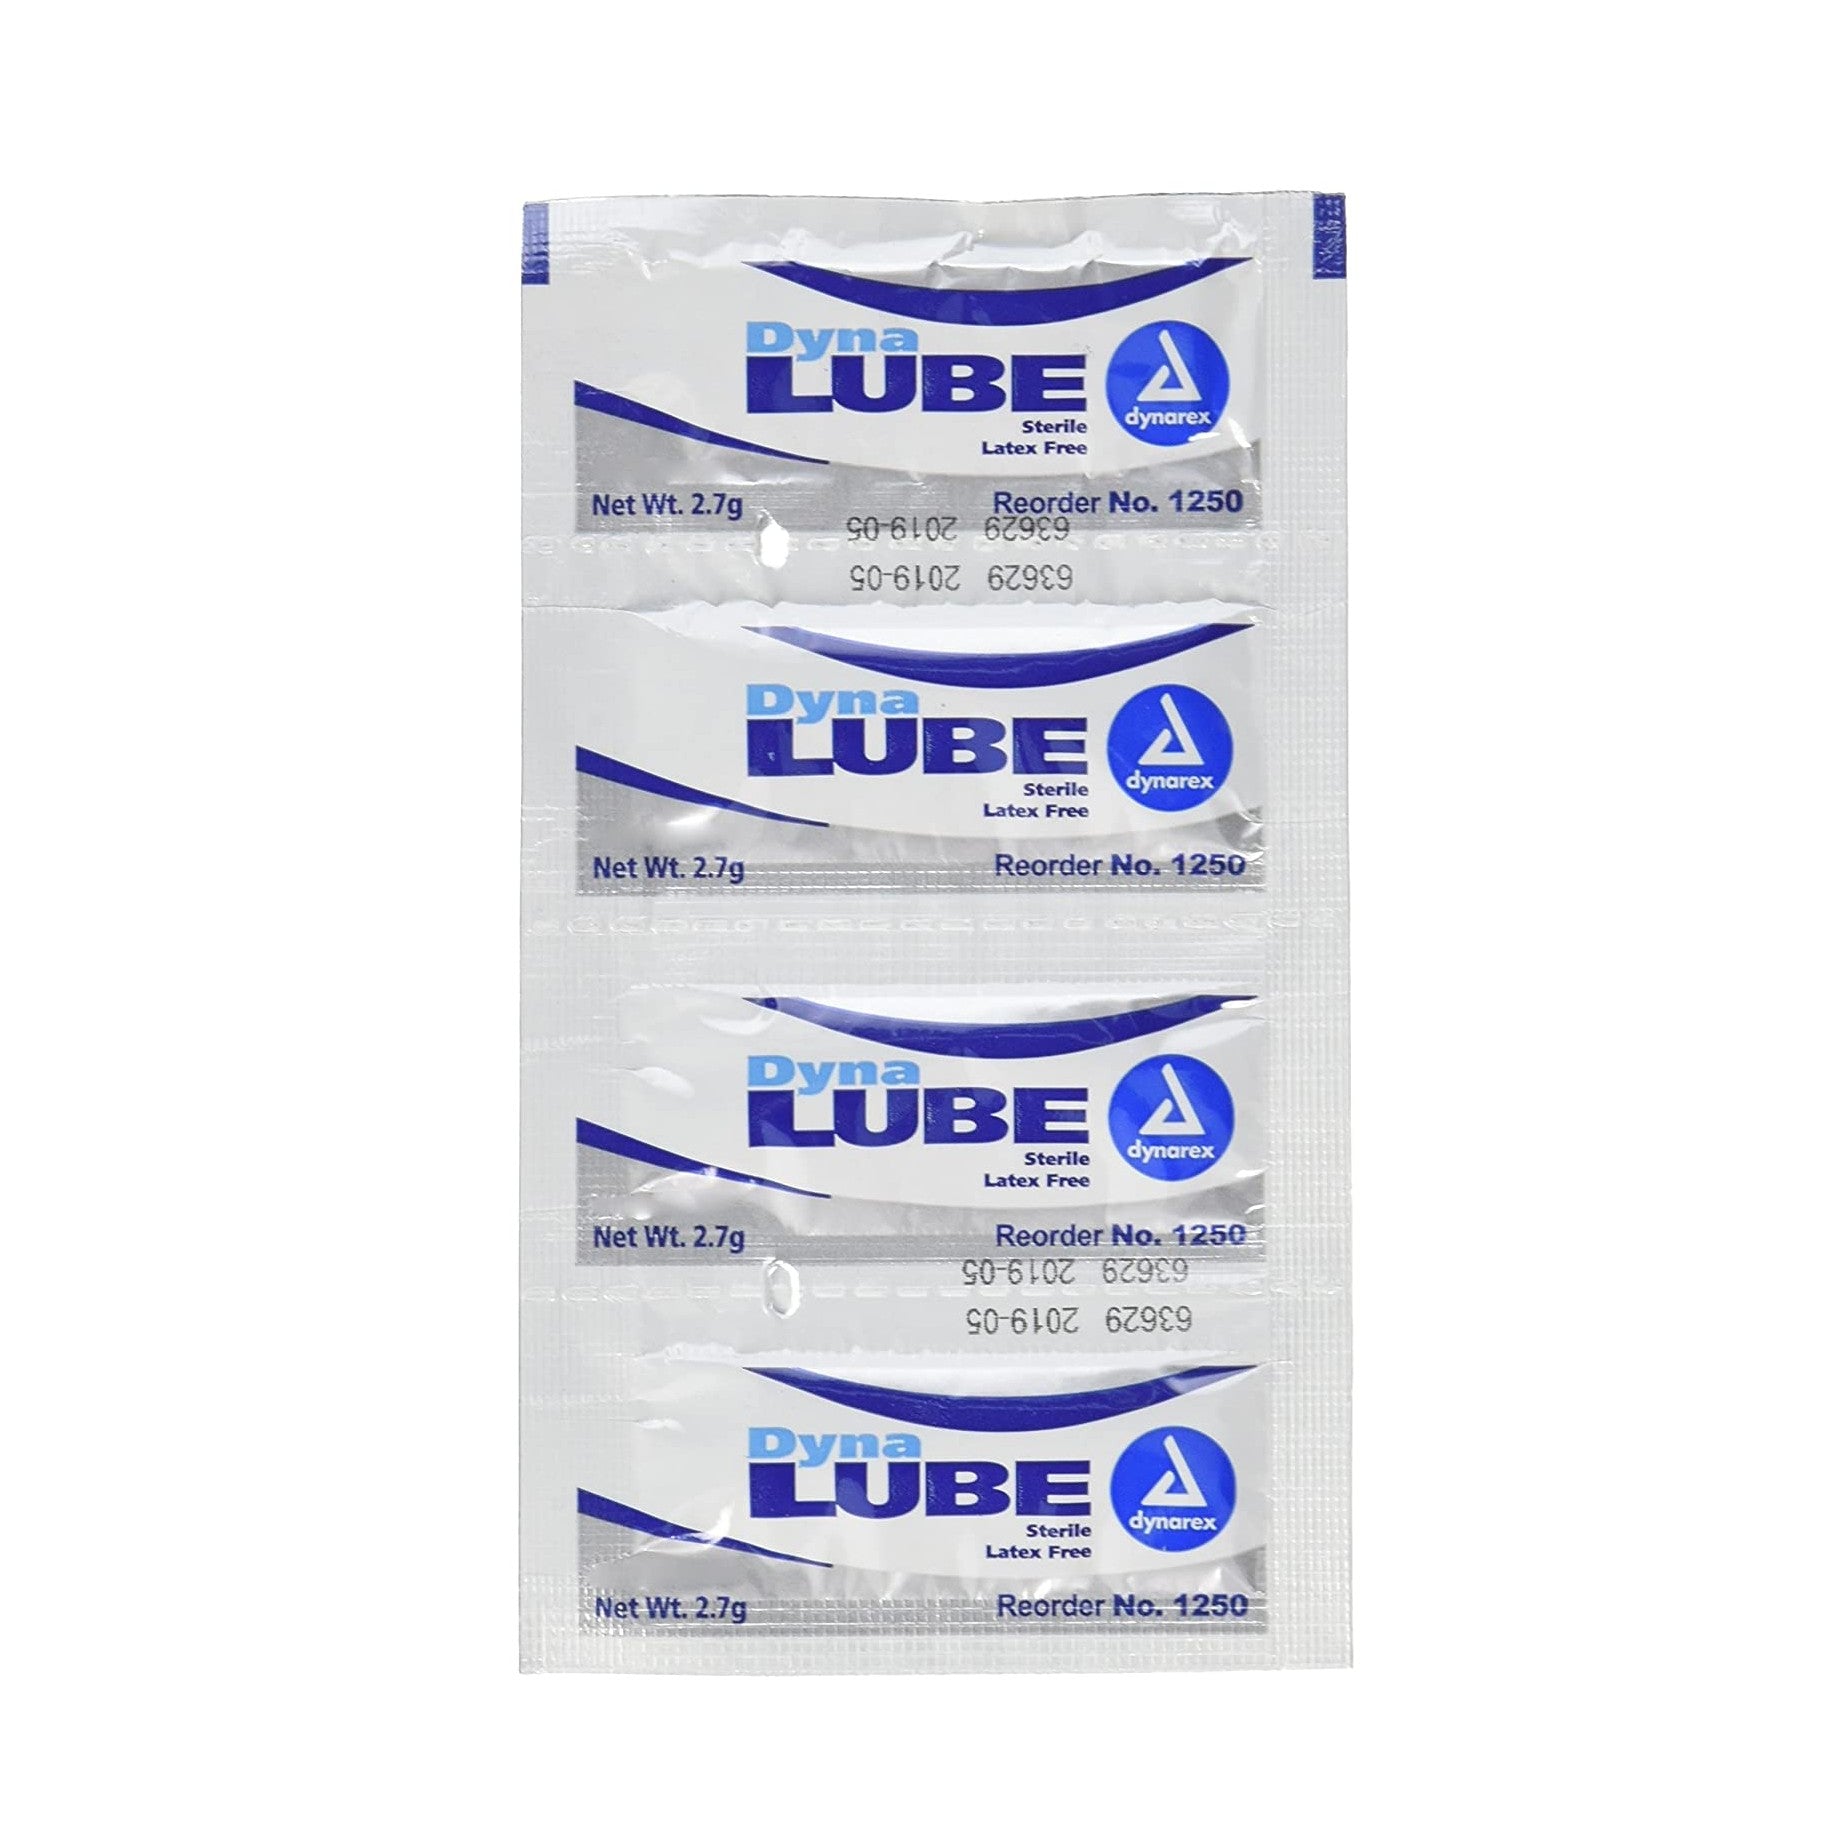 DynaLube Sterile Lubricating Jelly 2.7g Packet - 144/box